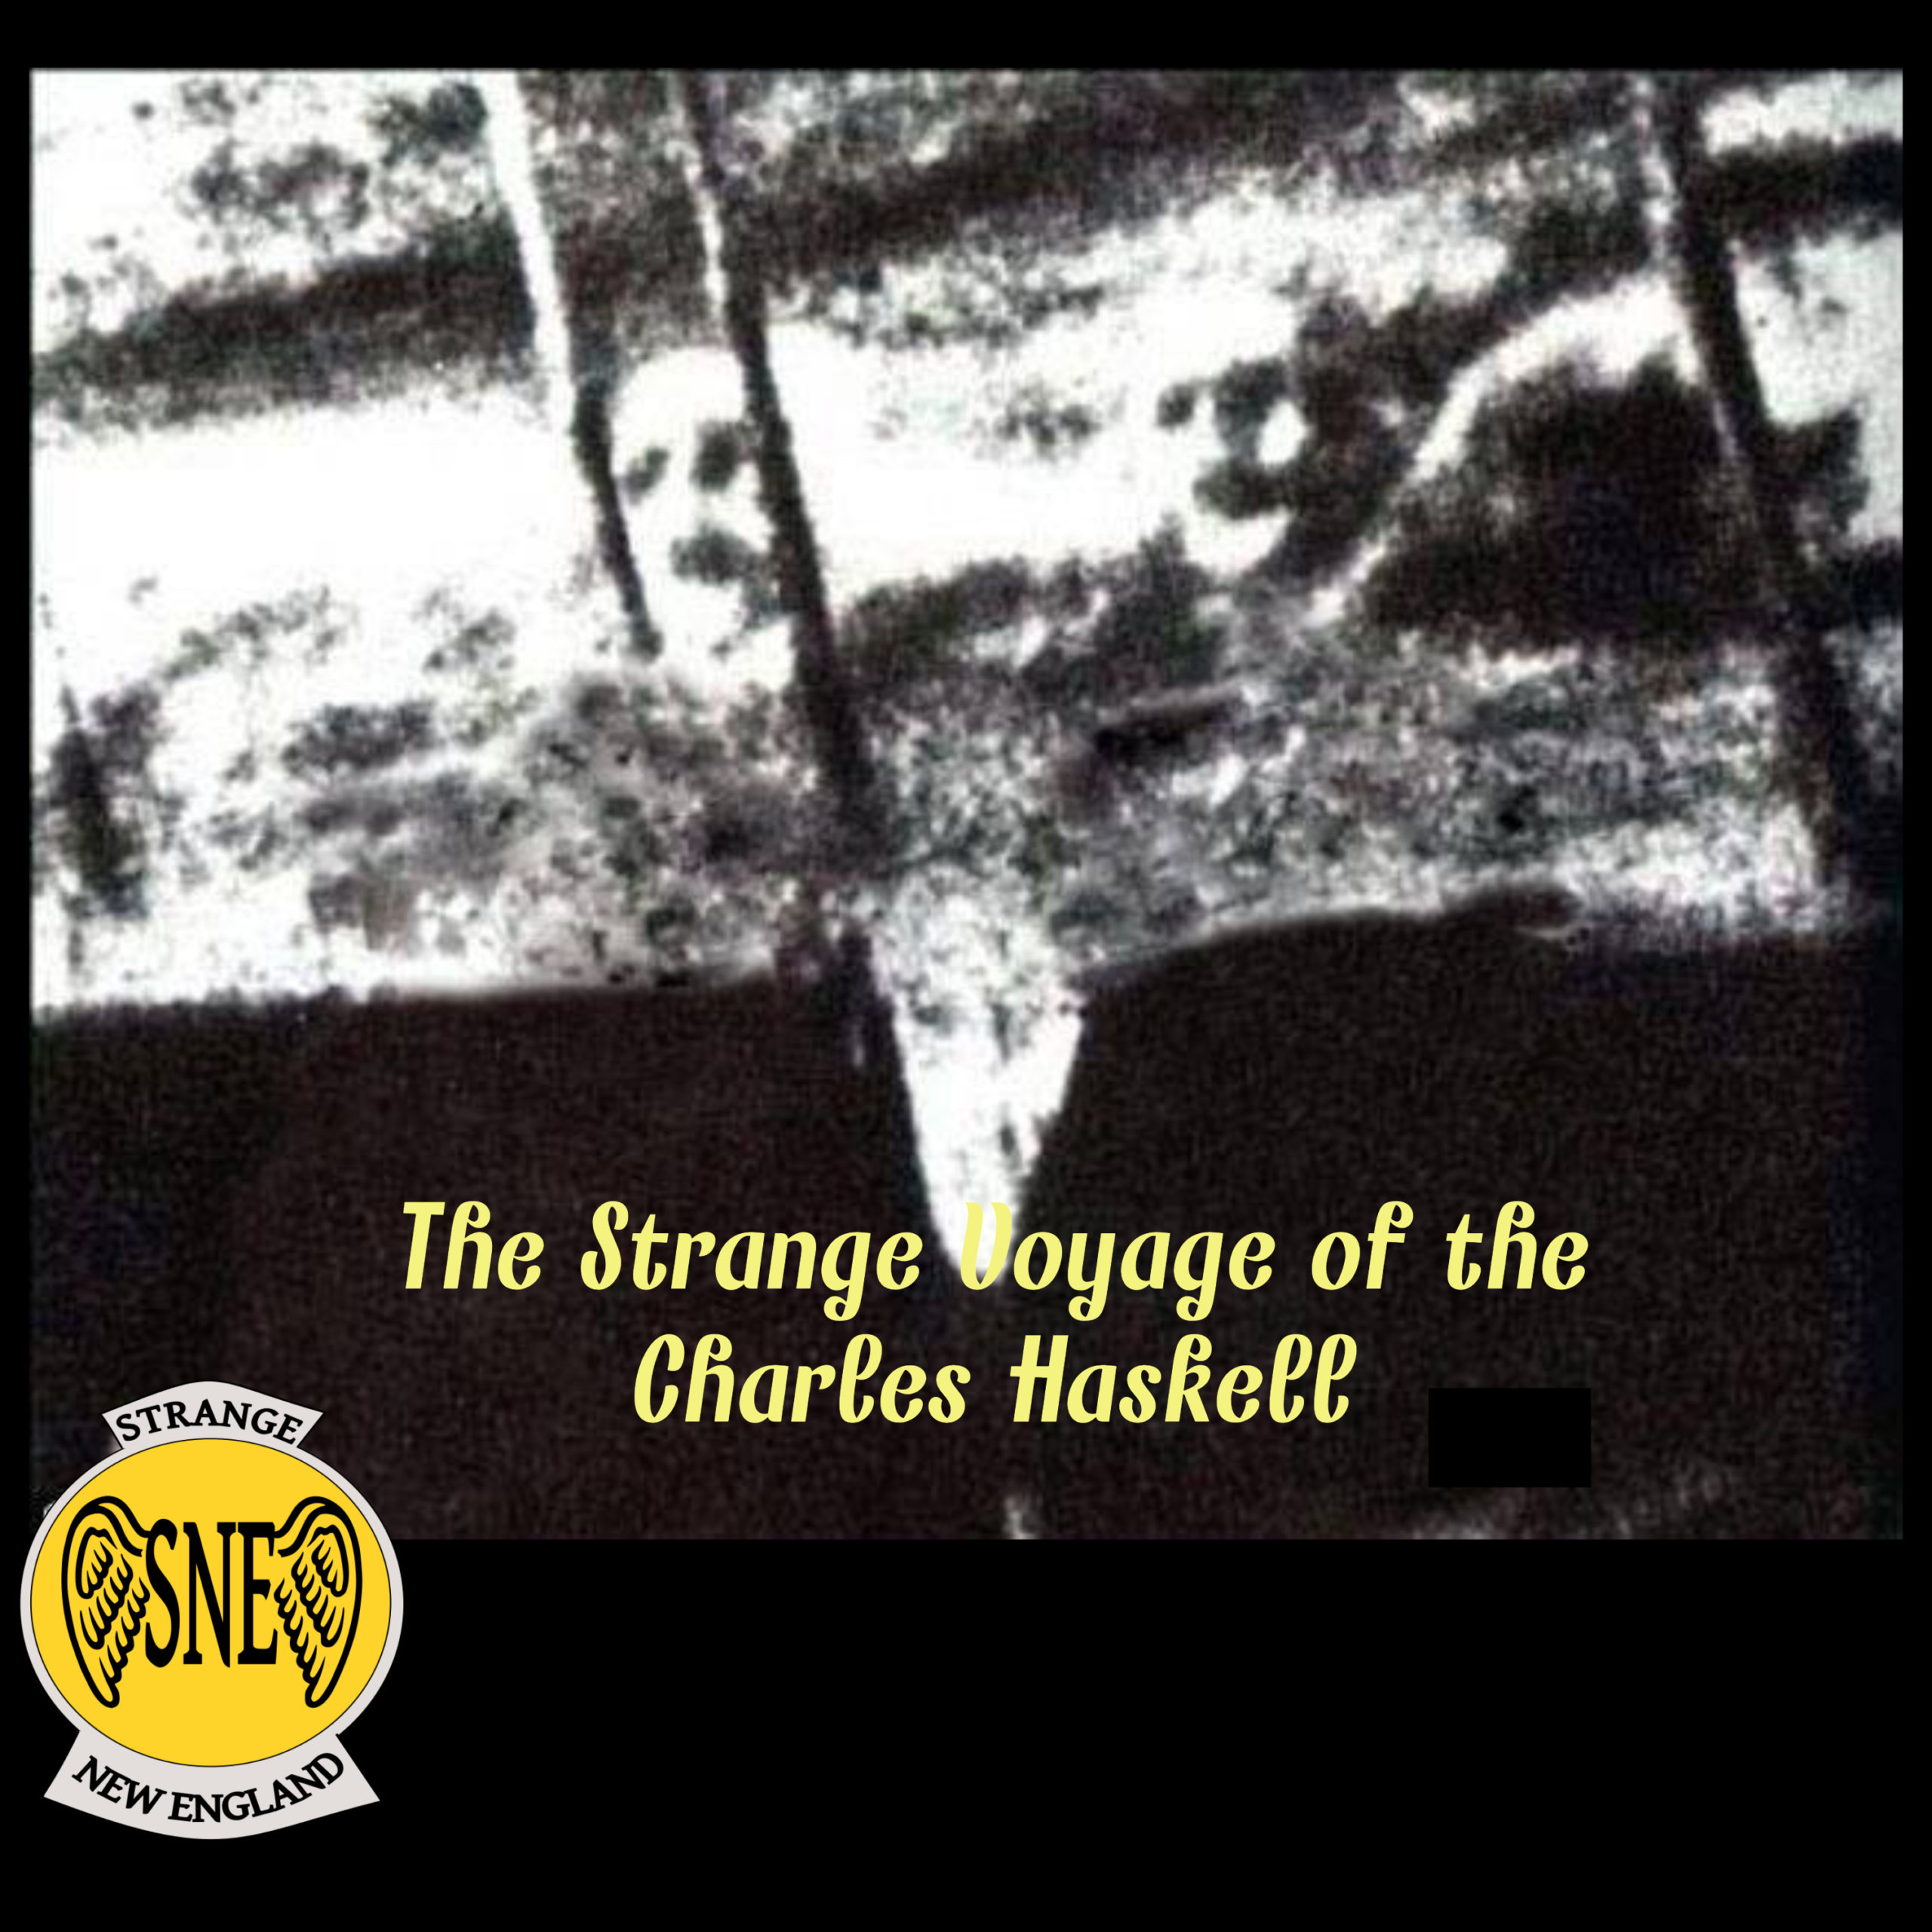 The Strange Voyage of the Charles Haskell